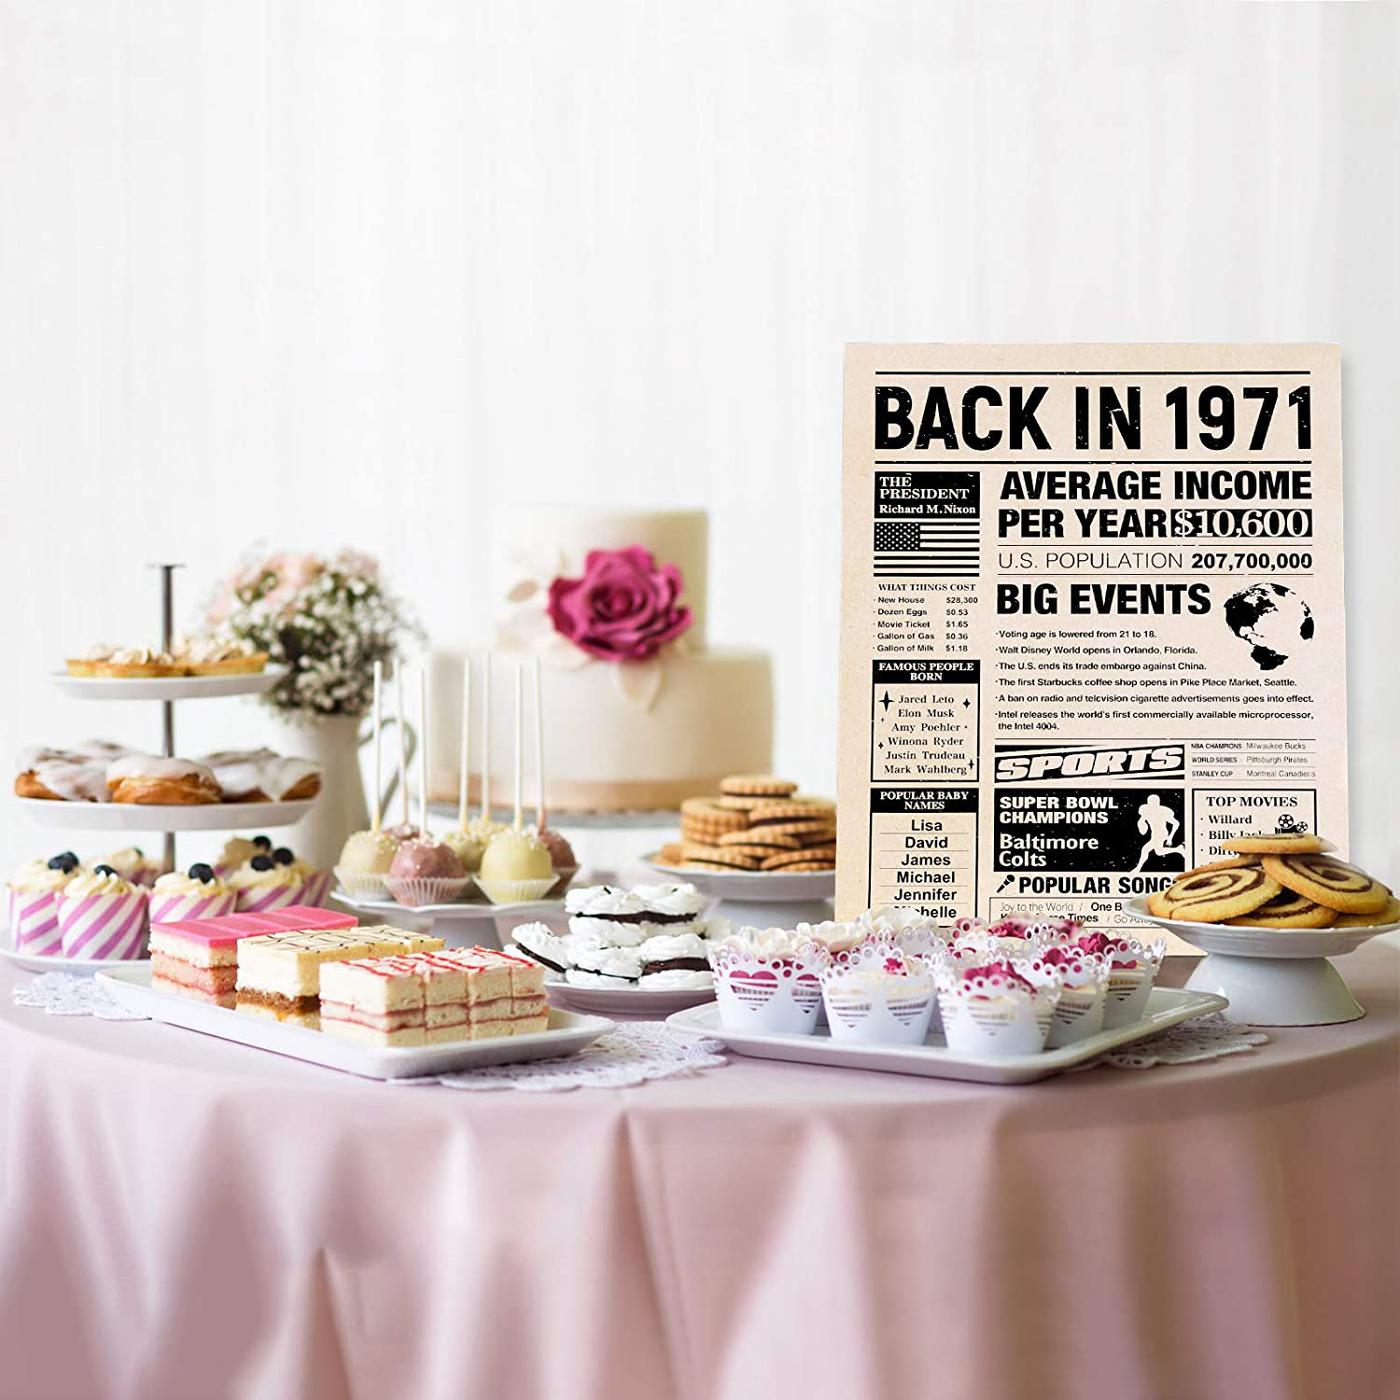 TopBashGo 50th Birthday or Wedding Anniversary Party Decoration Supplies, 50th Birthday Gift for Men and Women, 11x14 Inches Old Newspaper Poster from 50 Years Ago, Back in 1971 Poster, Made of thick and hard PVC